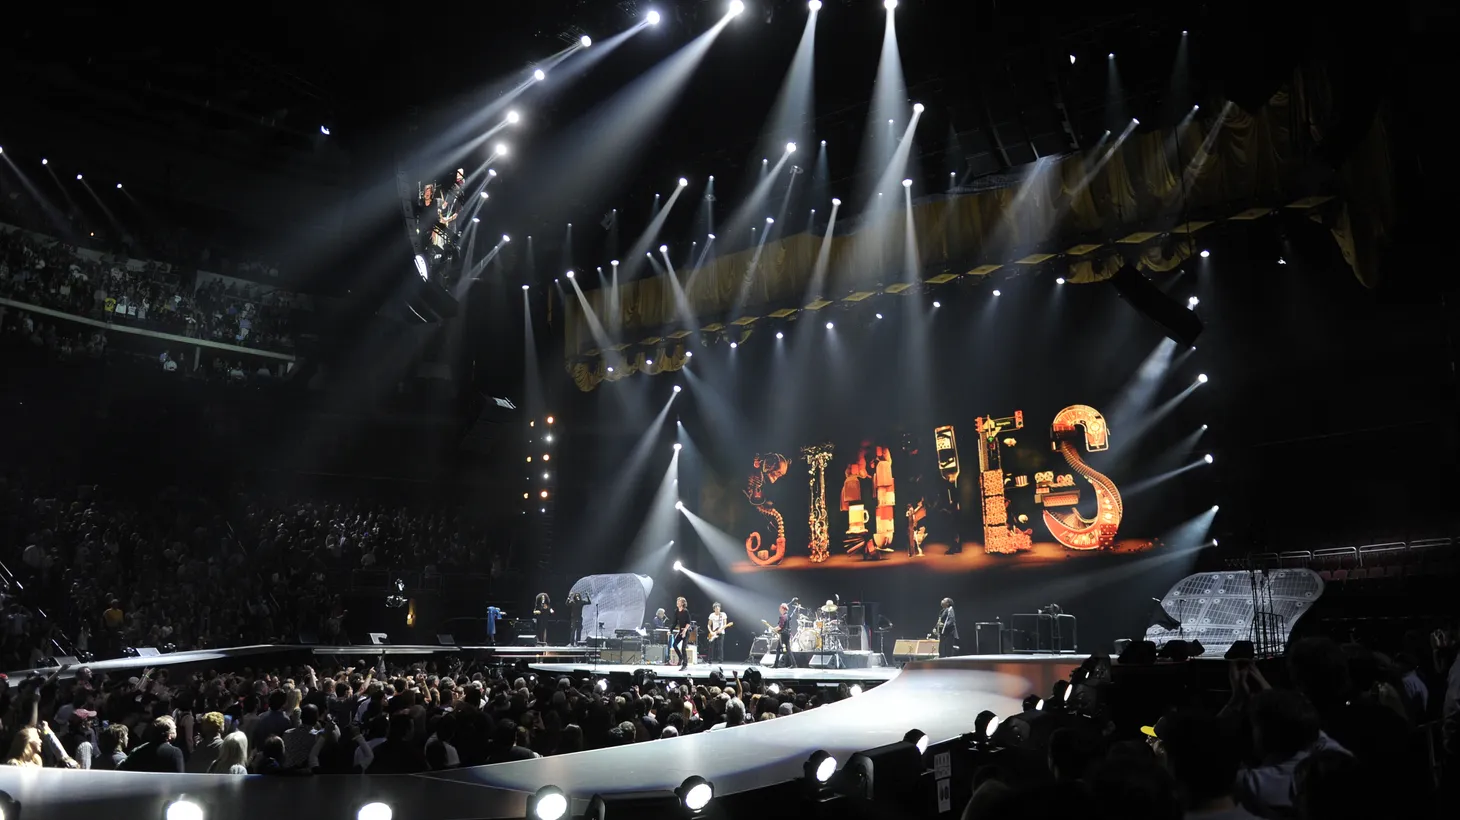 Back in 2012, The Stones celebrated their golden anniversary by playing 30 live dates across North America and Europe. To our delight, some of those shows were captured as audio gold, with their New Jersey show a particular stand-out.